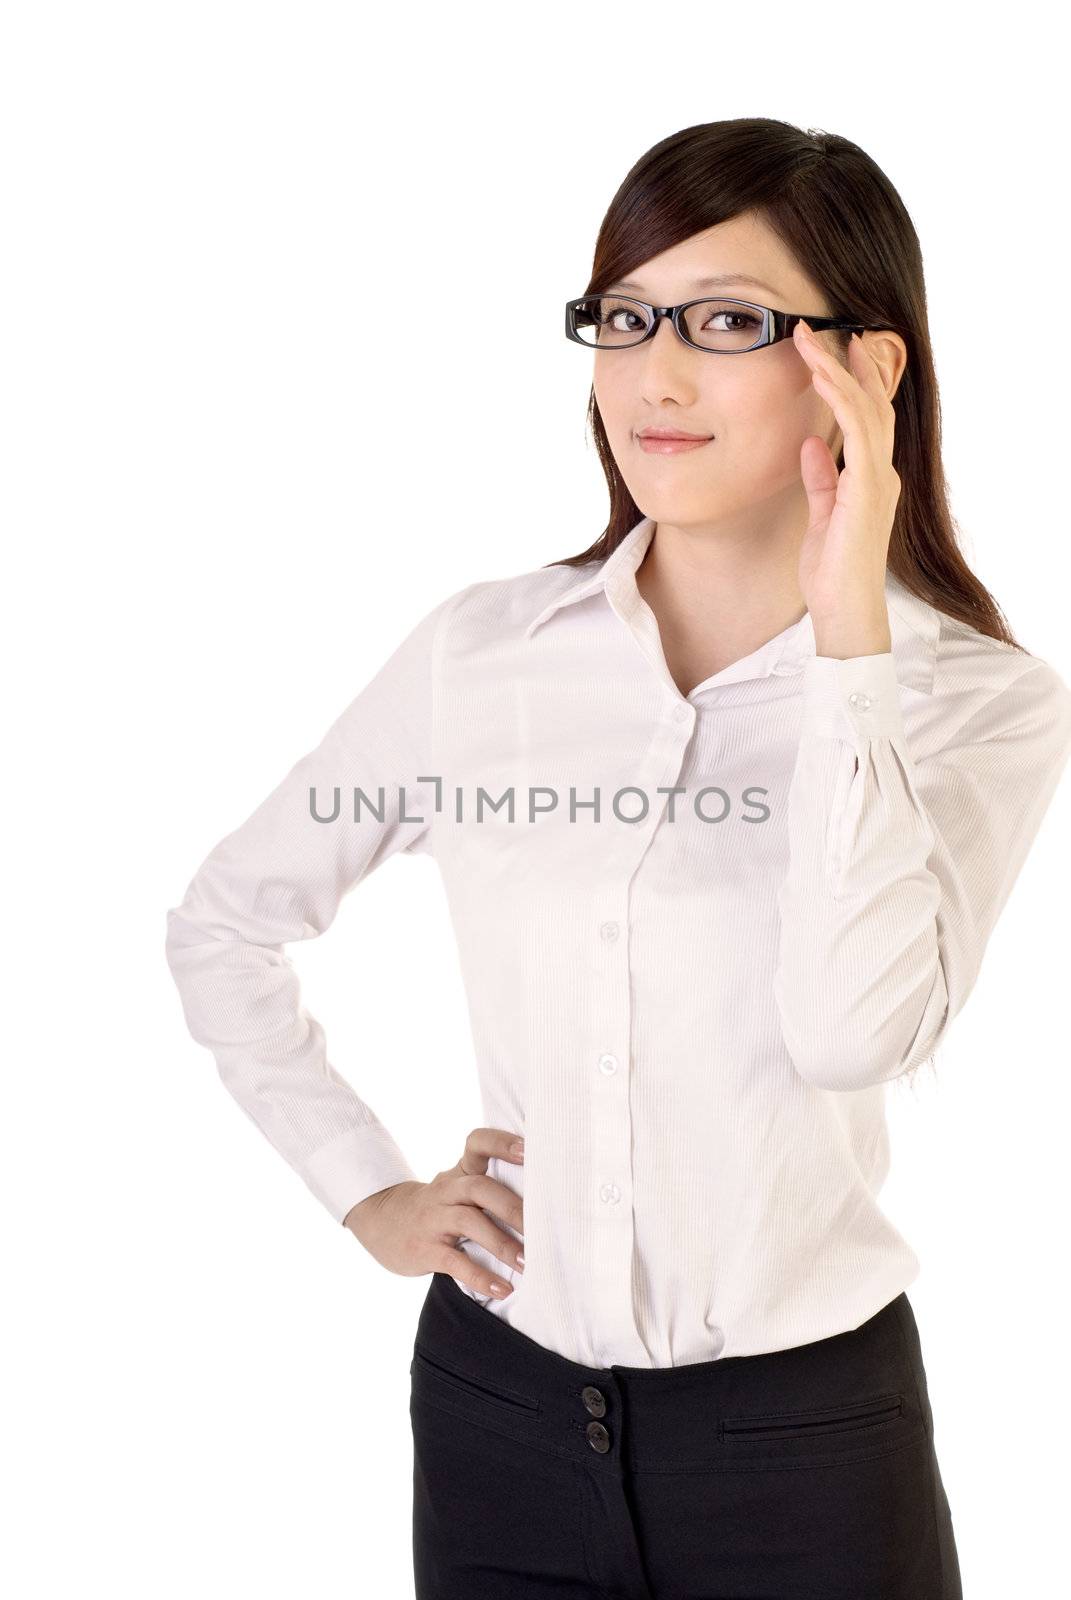 Smart business woman portrait with glass on white background.